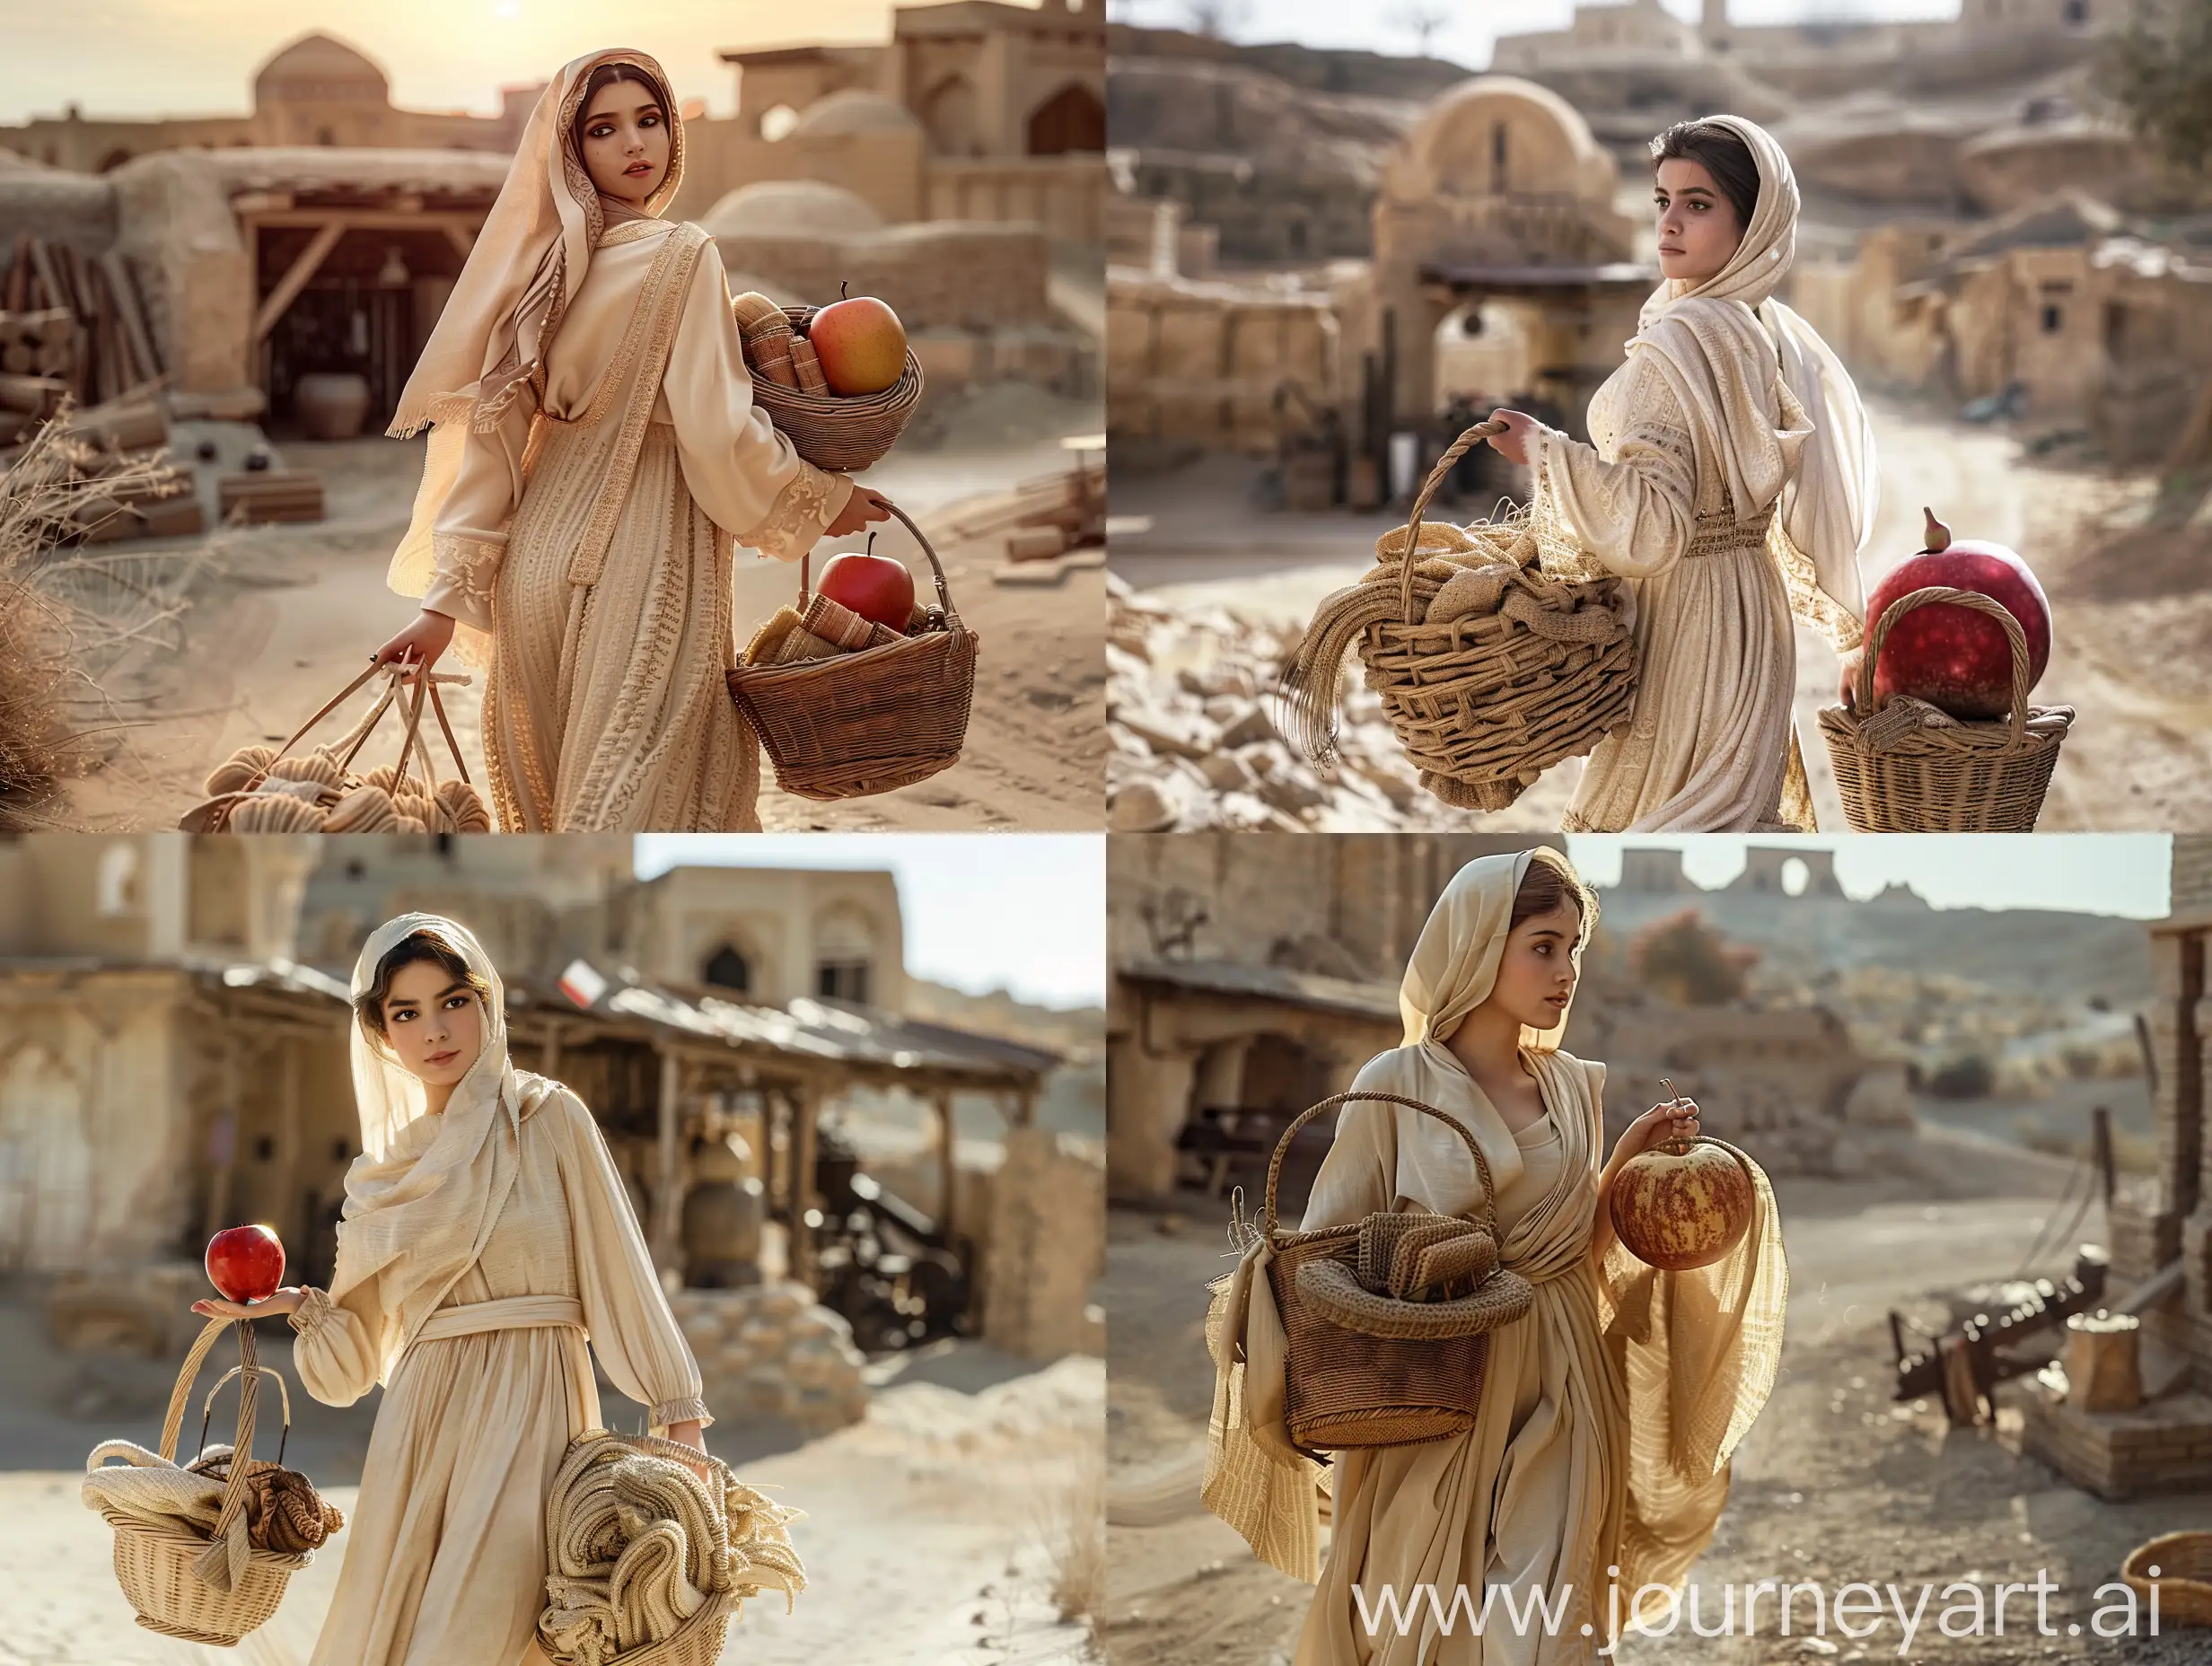 A young Persian woman wearing a cream-colored dress and headscarf, holding a basket full of woven shawls in one hand and an big apple the size of a watermelon in the other basket, is walking towards an old blacksmith shop in the Bam citadel of Kerman. in a desert, in an ancient civilization, cinematic, epic realism,8K, highly detailed, glamour lighting, backlit 